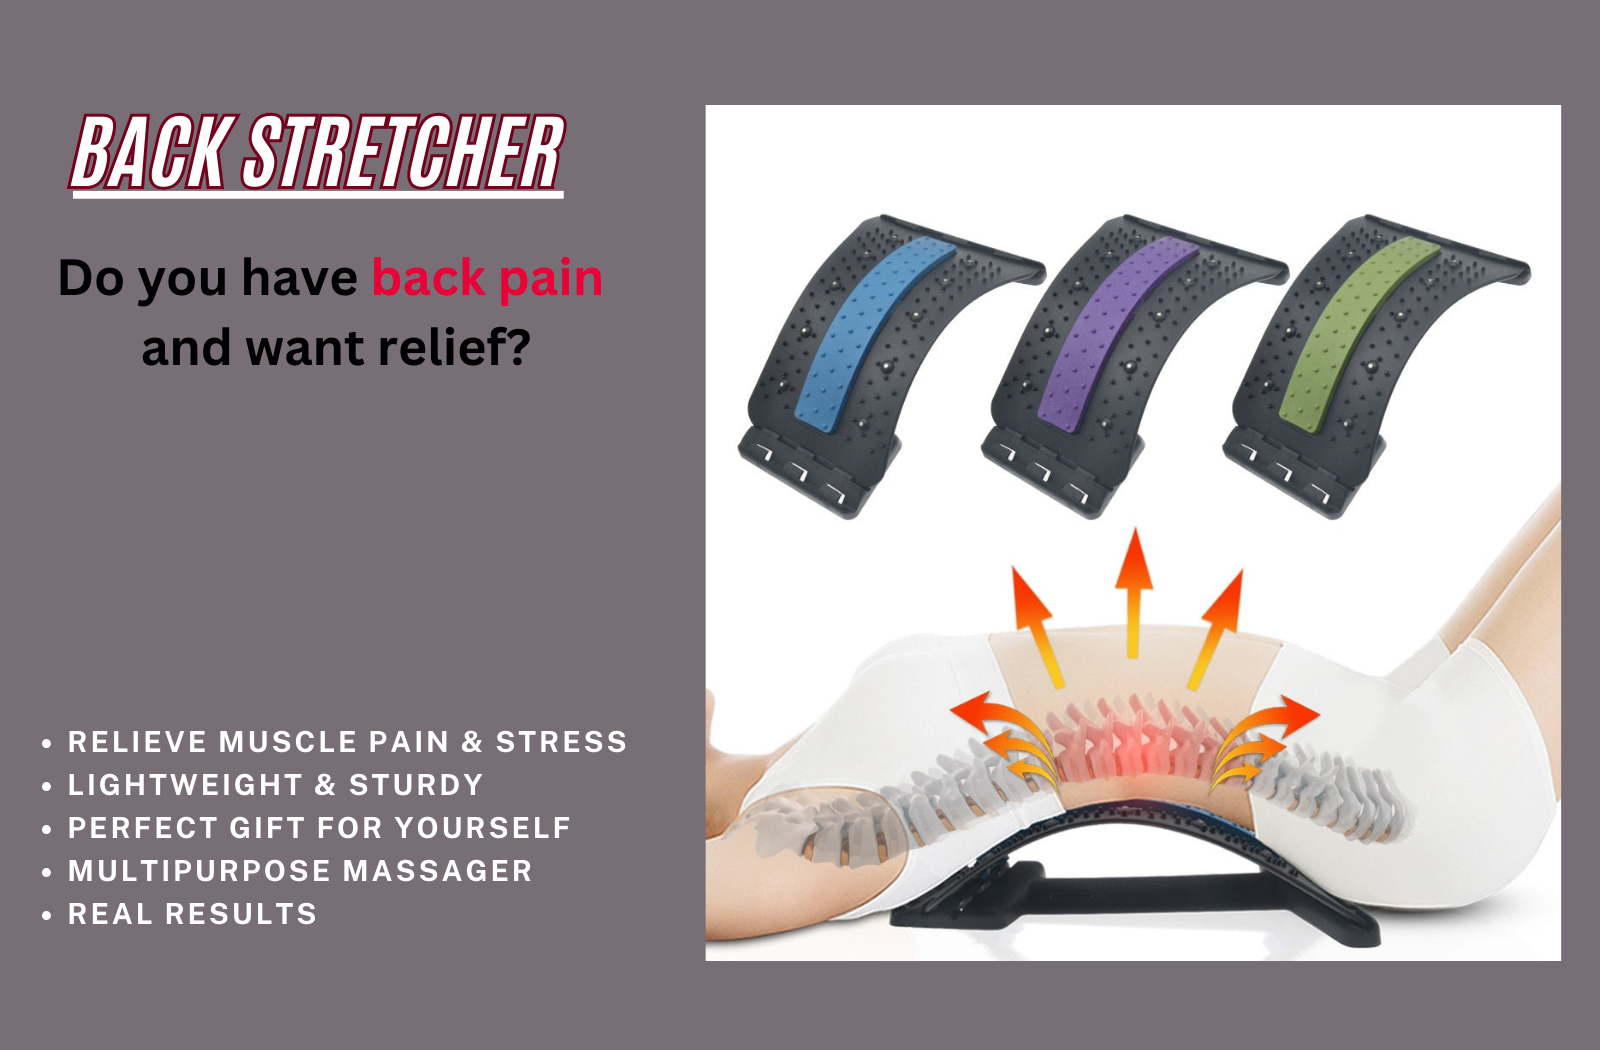 Our Back Stretcher is a convenient at home back pain treatment and preventative care product.